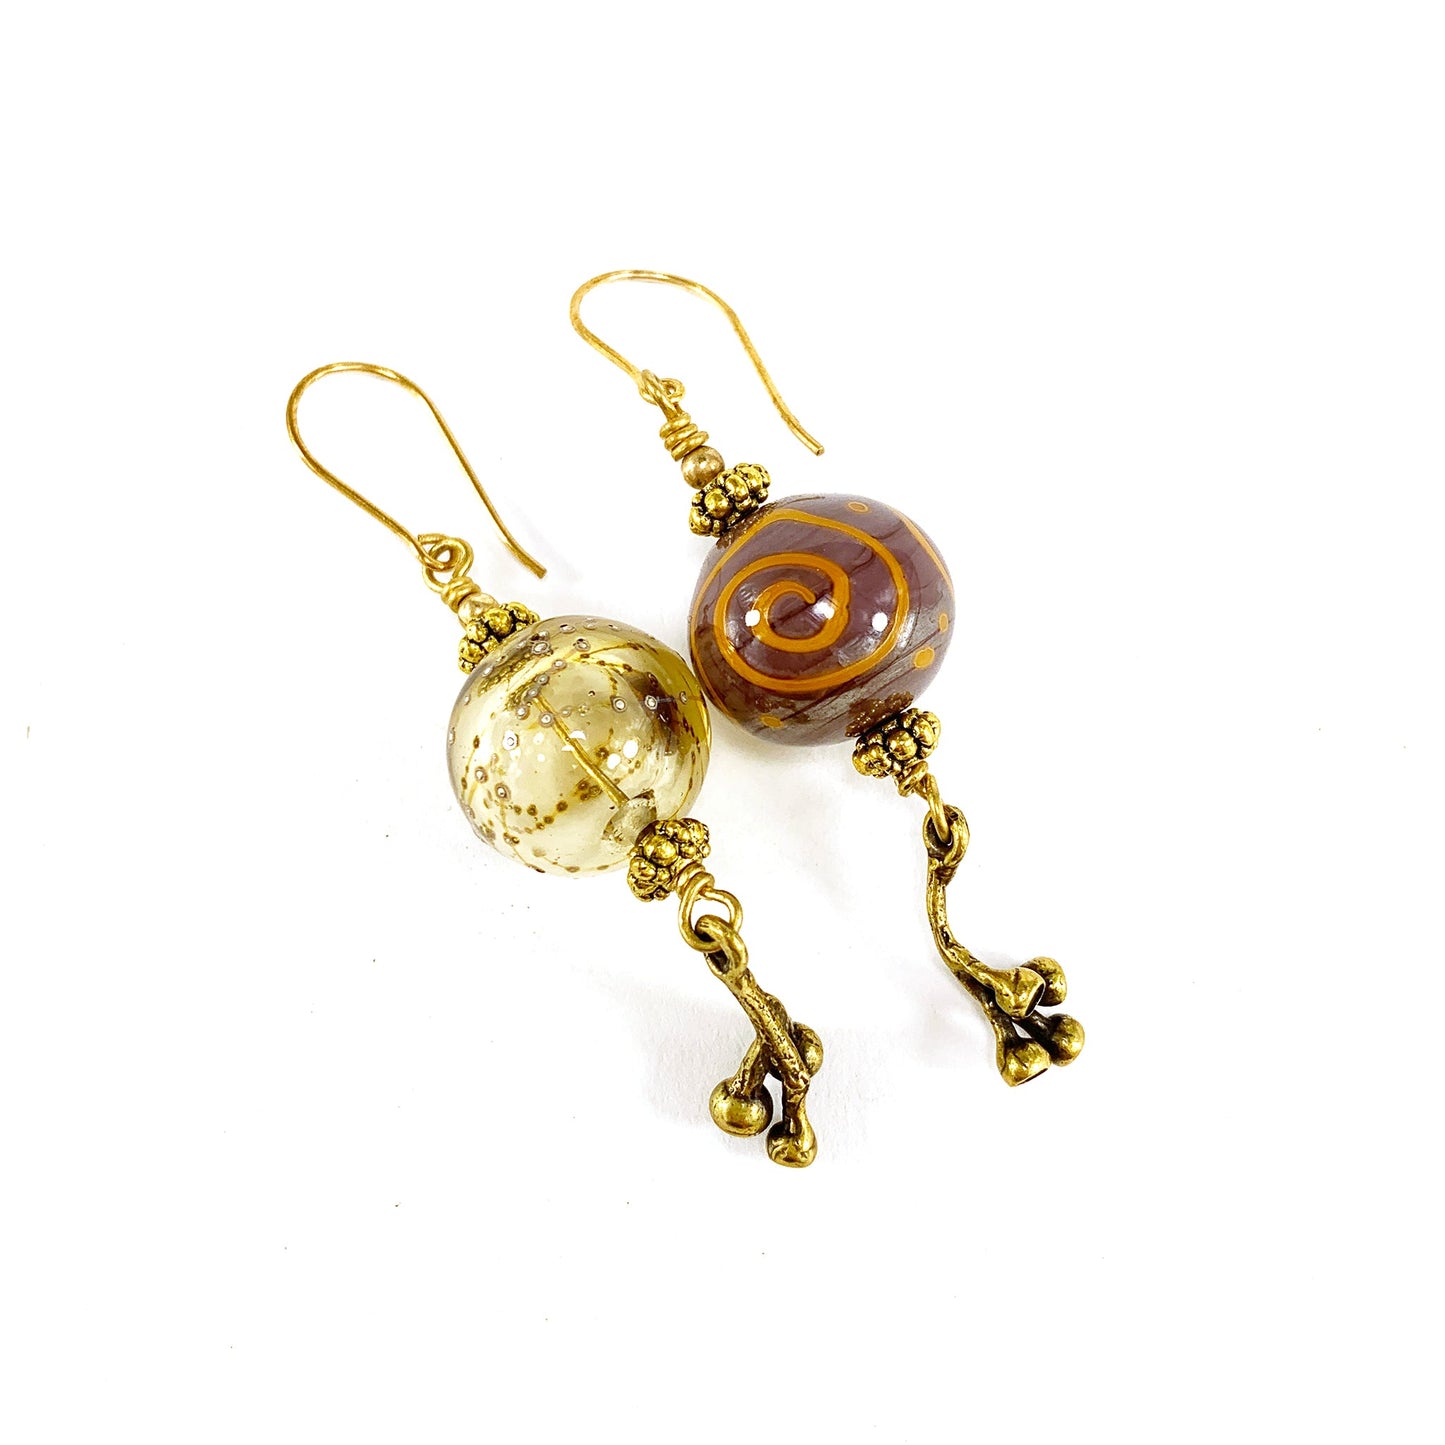 Amber and Lavender Earrings - The Glass Acorn